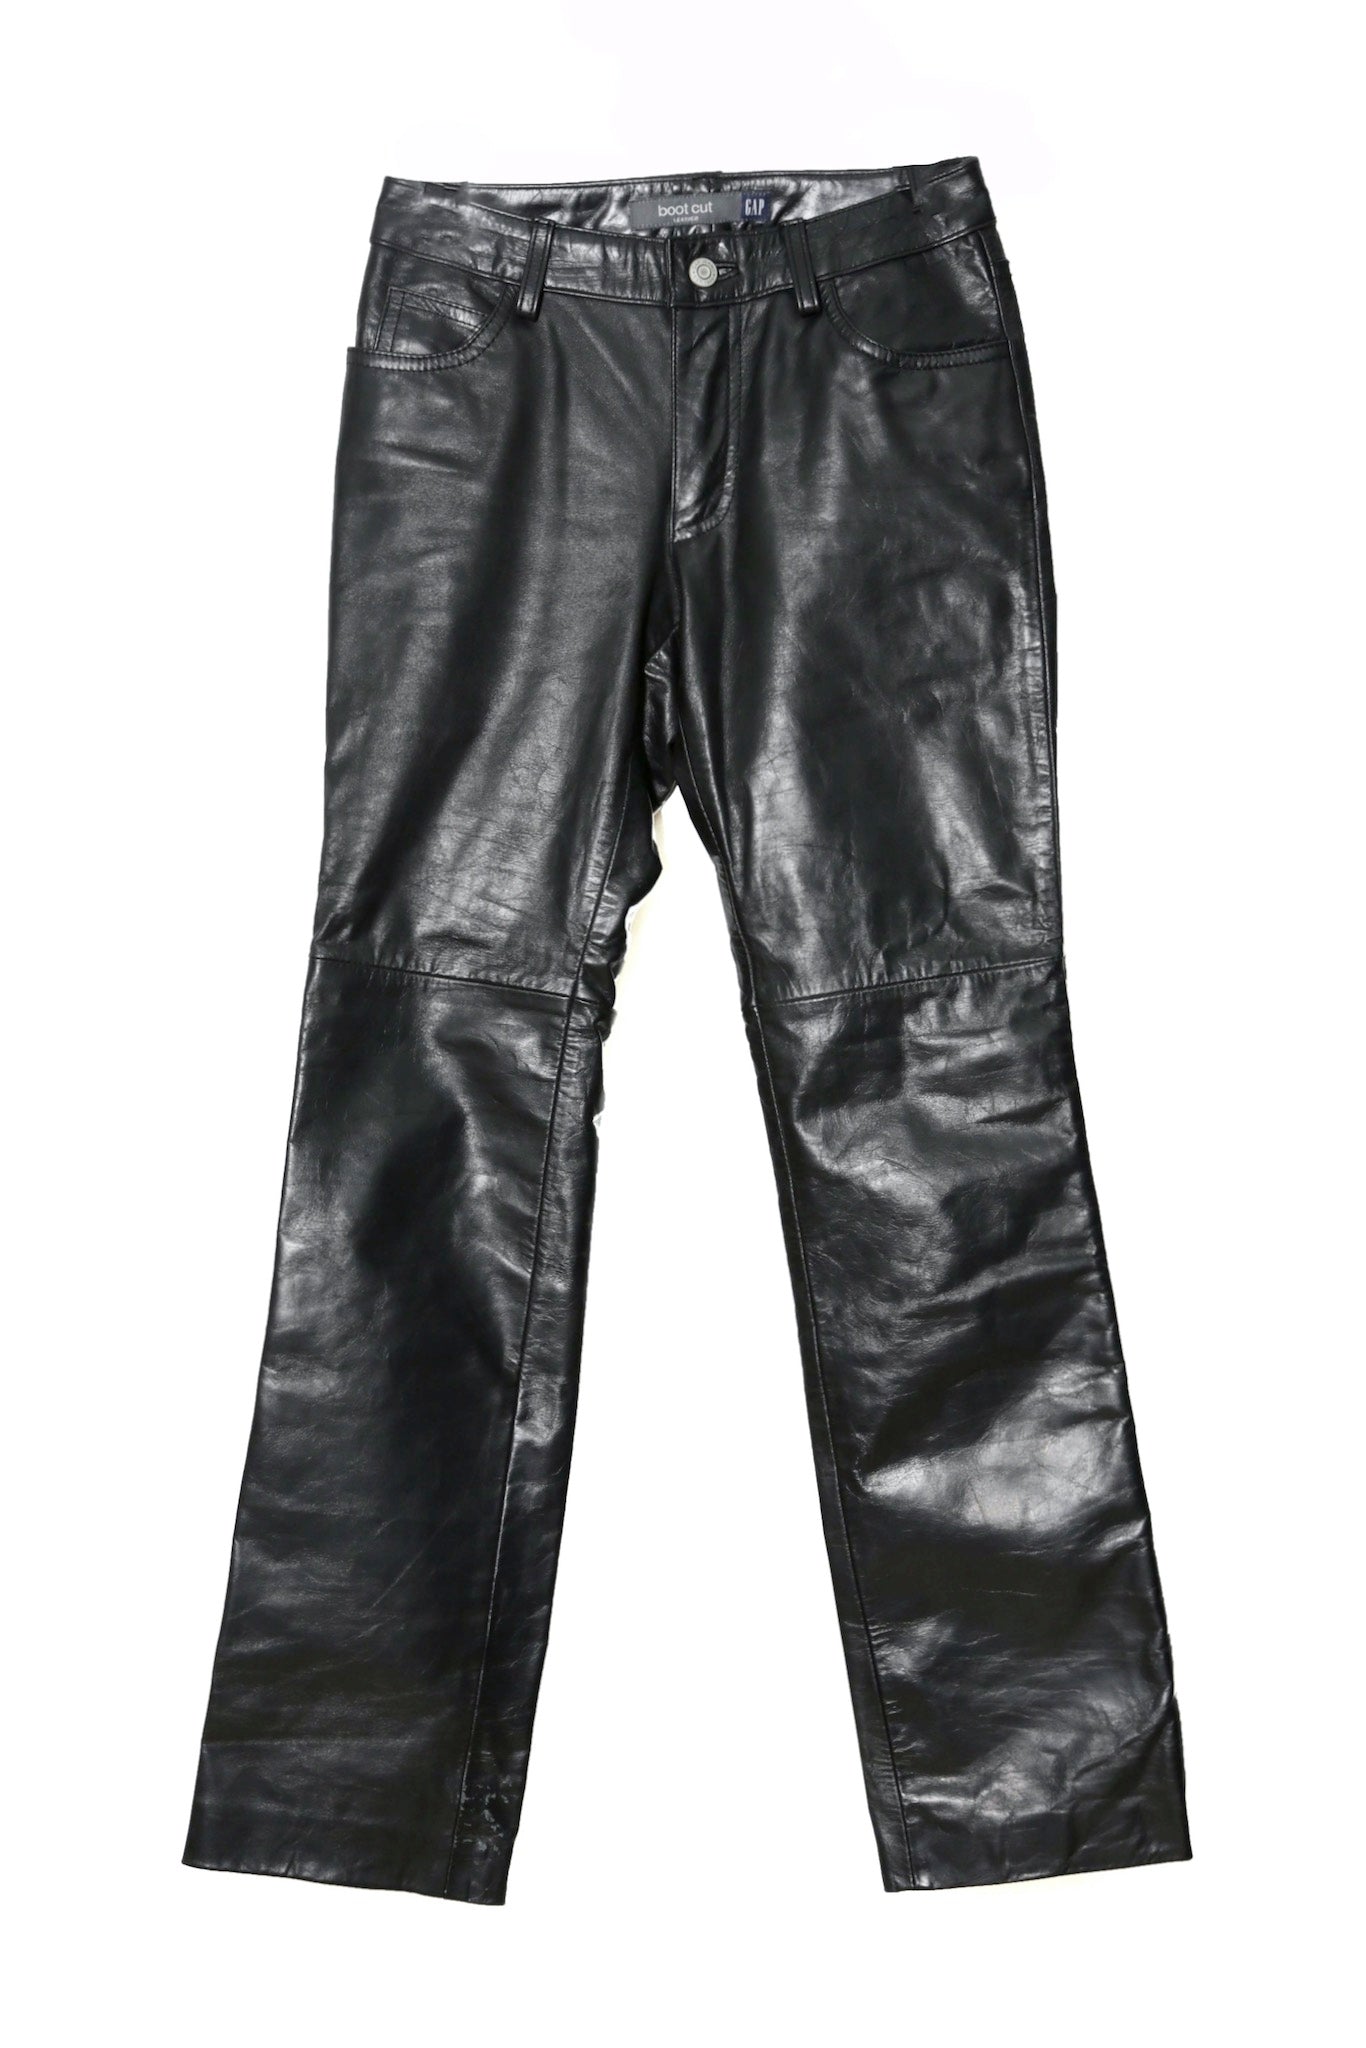 OLD GAP LEATHER PANTS